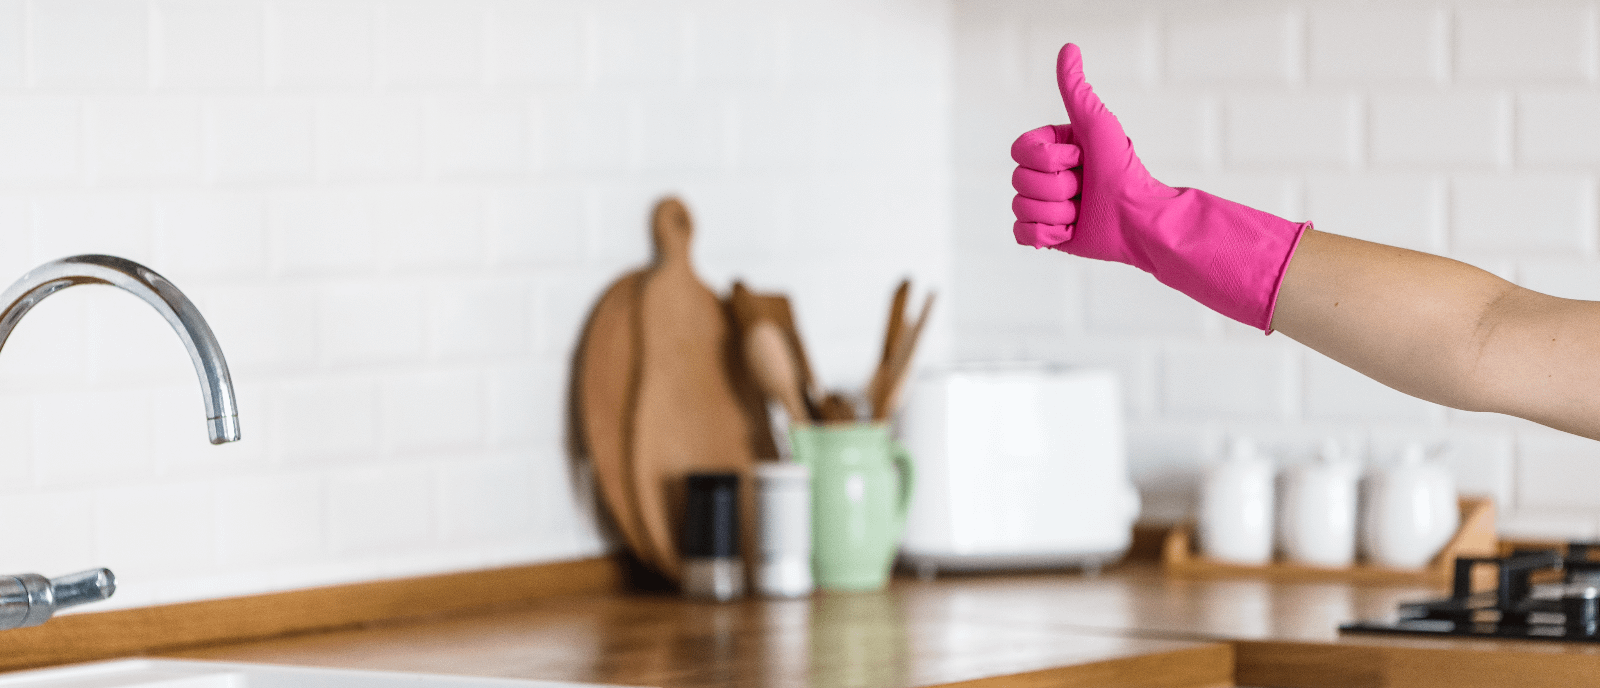 Hand giving the thumbs up whilst wearing a hot pink kitchen glove. Background shows wooden kitchen countertop with stainless steel tap and sink.